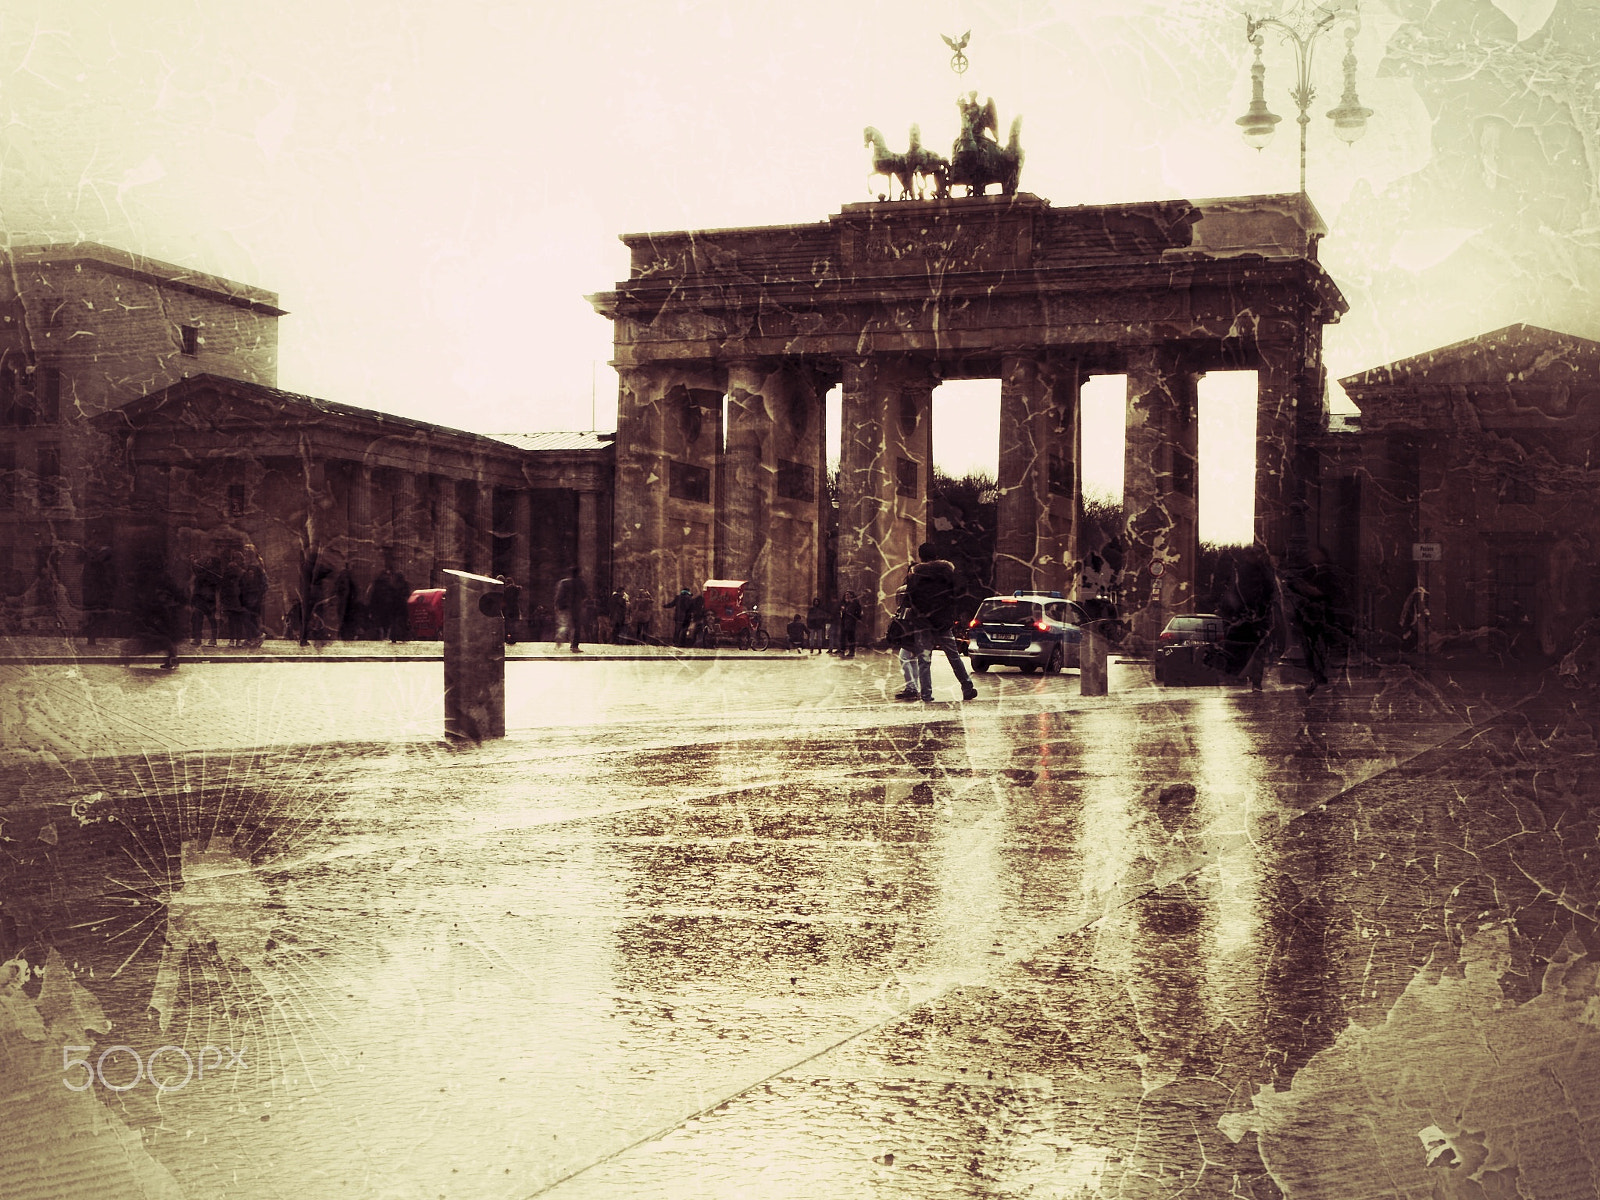 Olympus PEN-F sample photo. History's weight - brandeburg gate photography